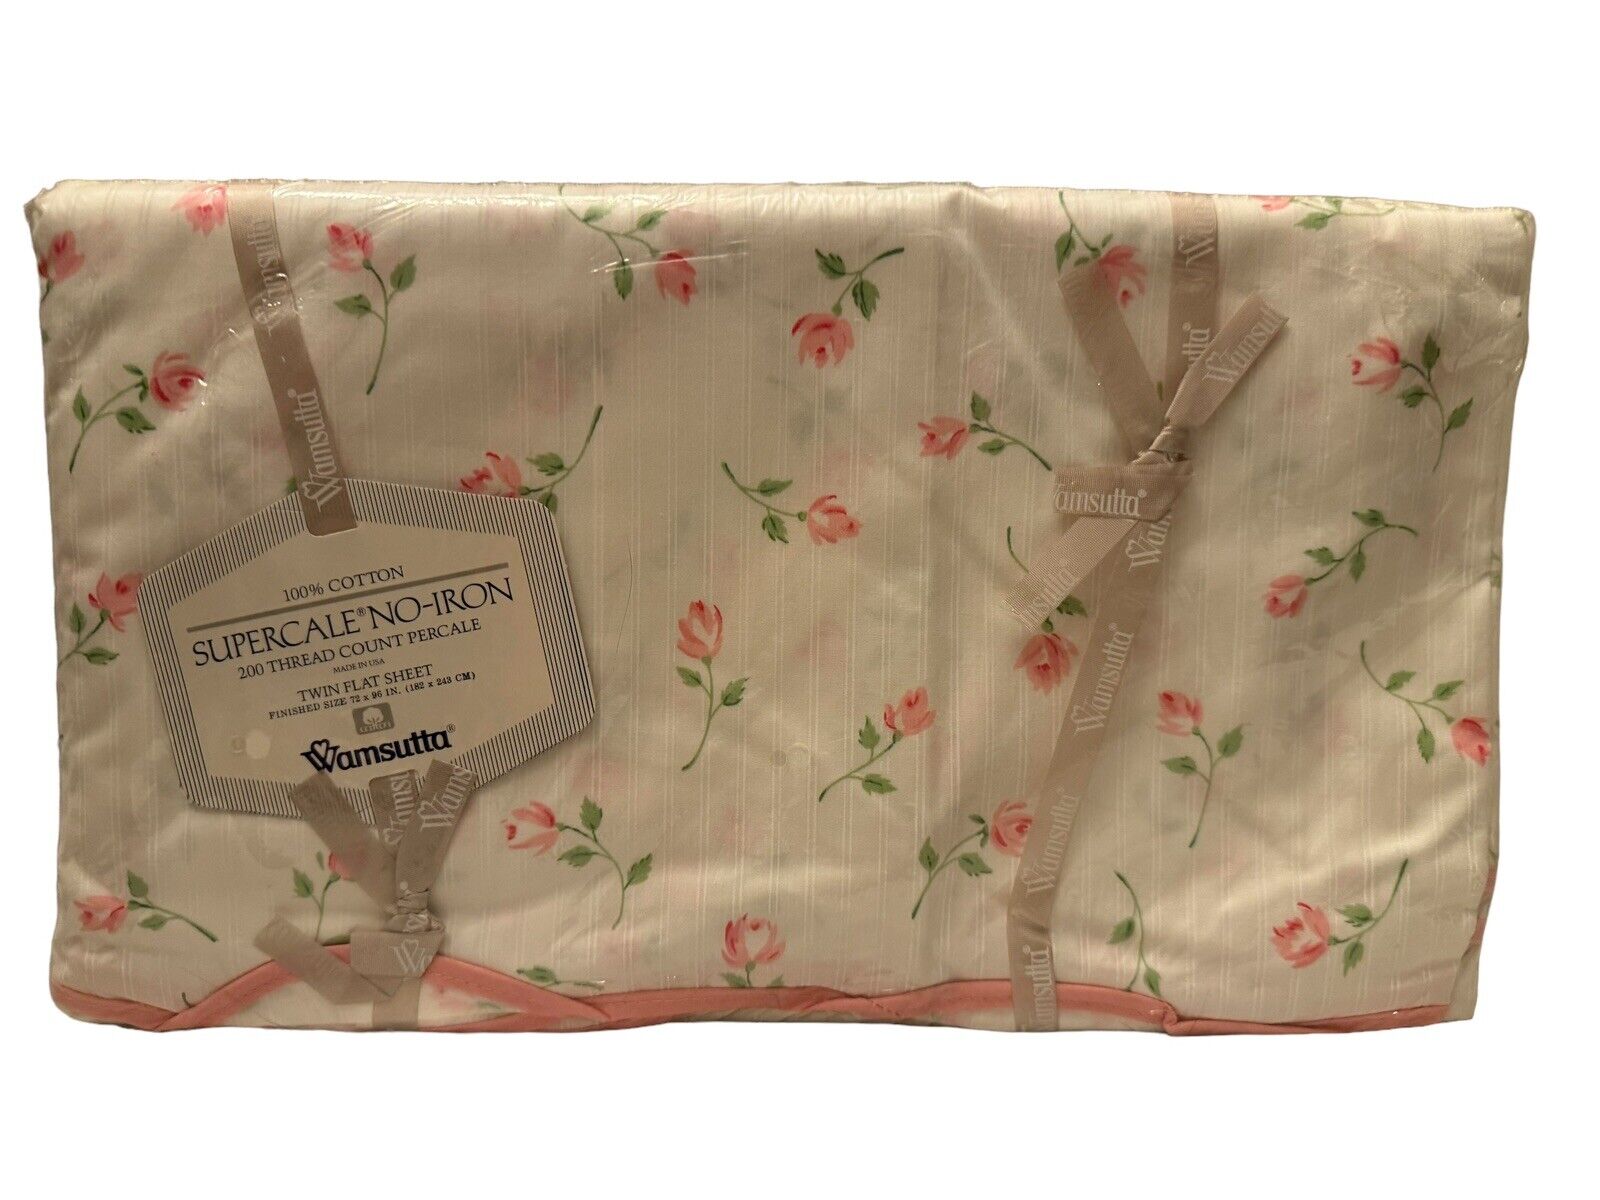 Vintage Wamsutta Regency Rose Supercale No Iron Twin Flat Sheet Cottage Floral￼